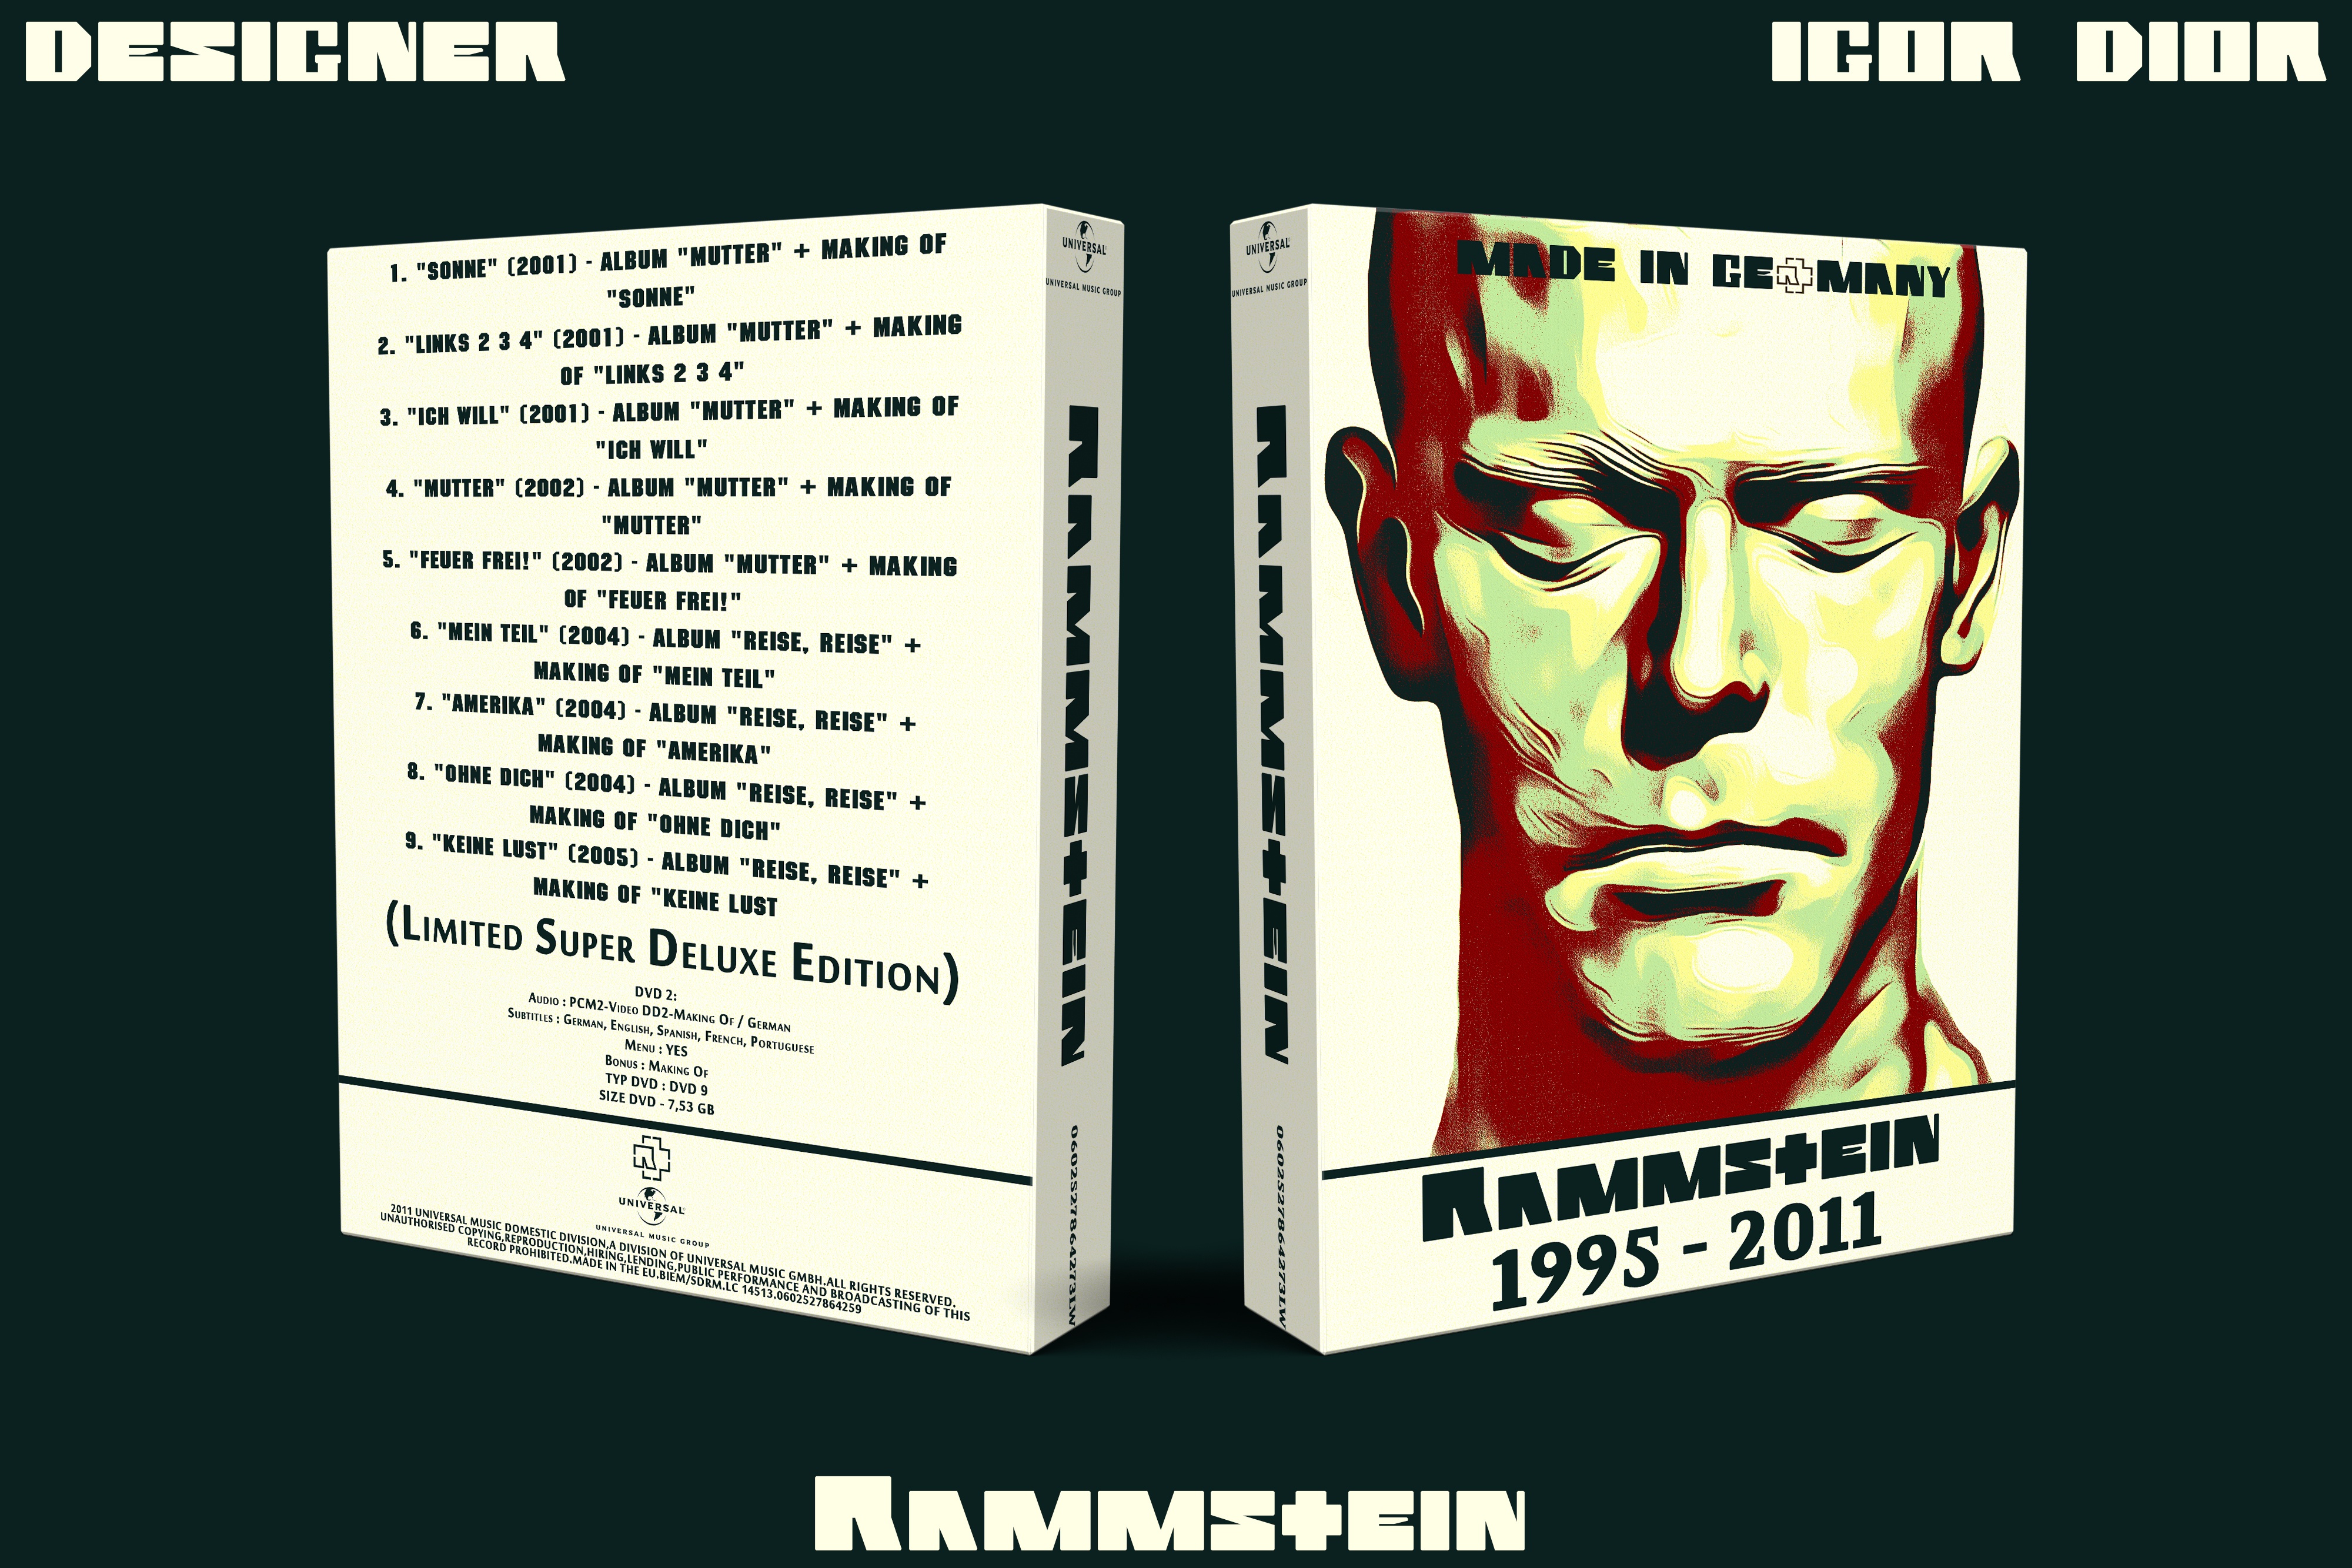 Made in Germany 1995–2011 box cover